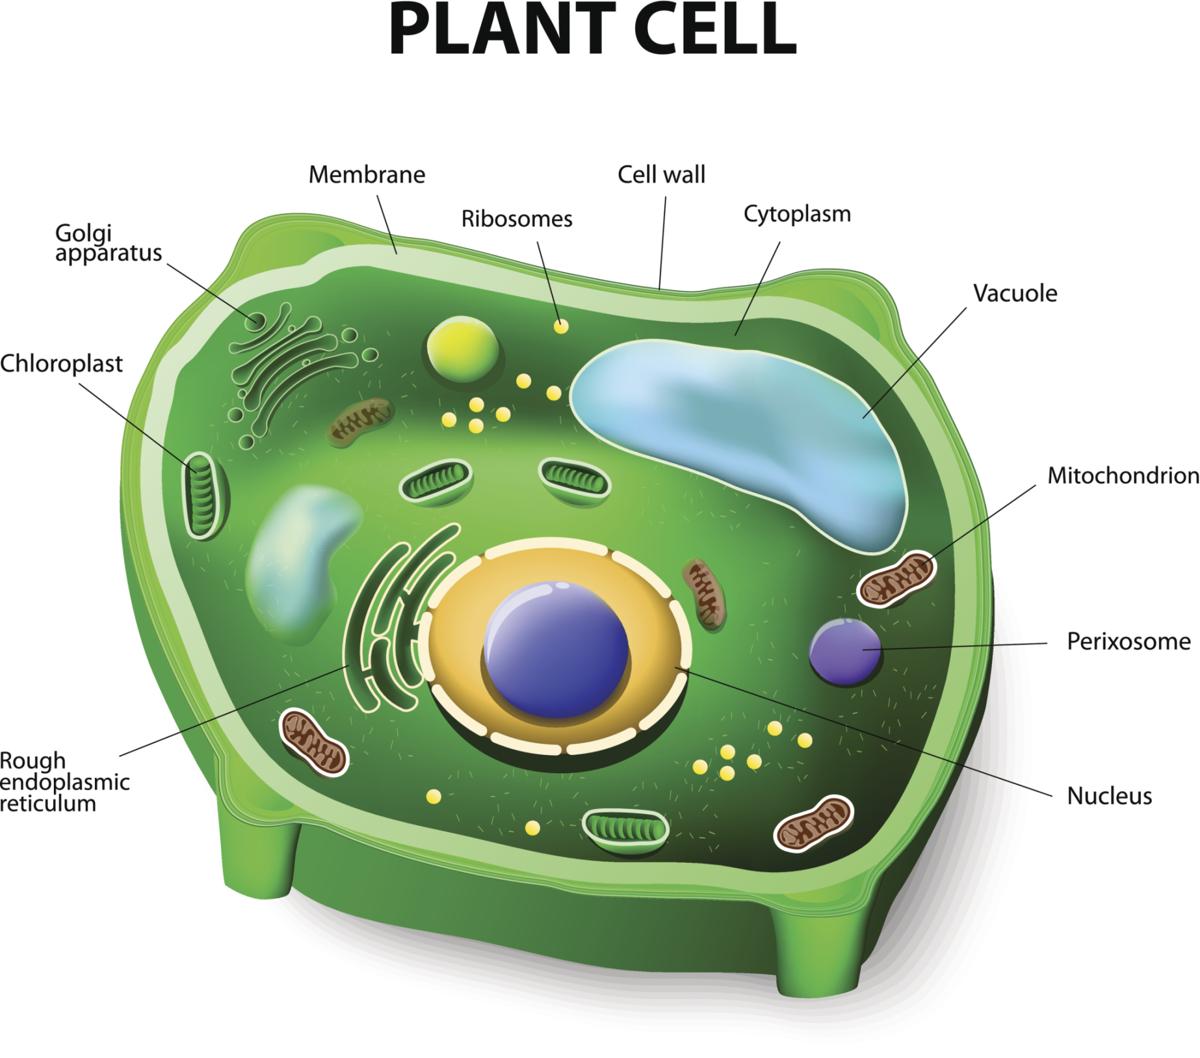 A Brief Comparison of Plant Cell Vs. Animal Cell